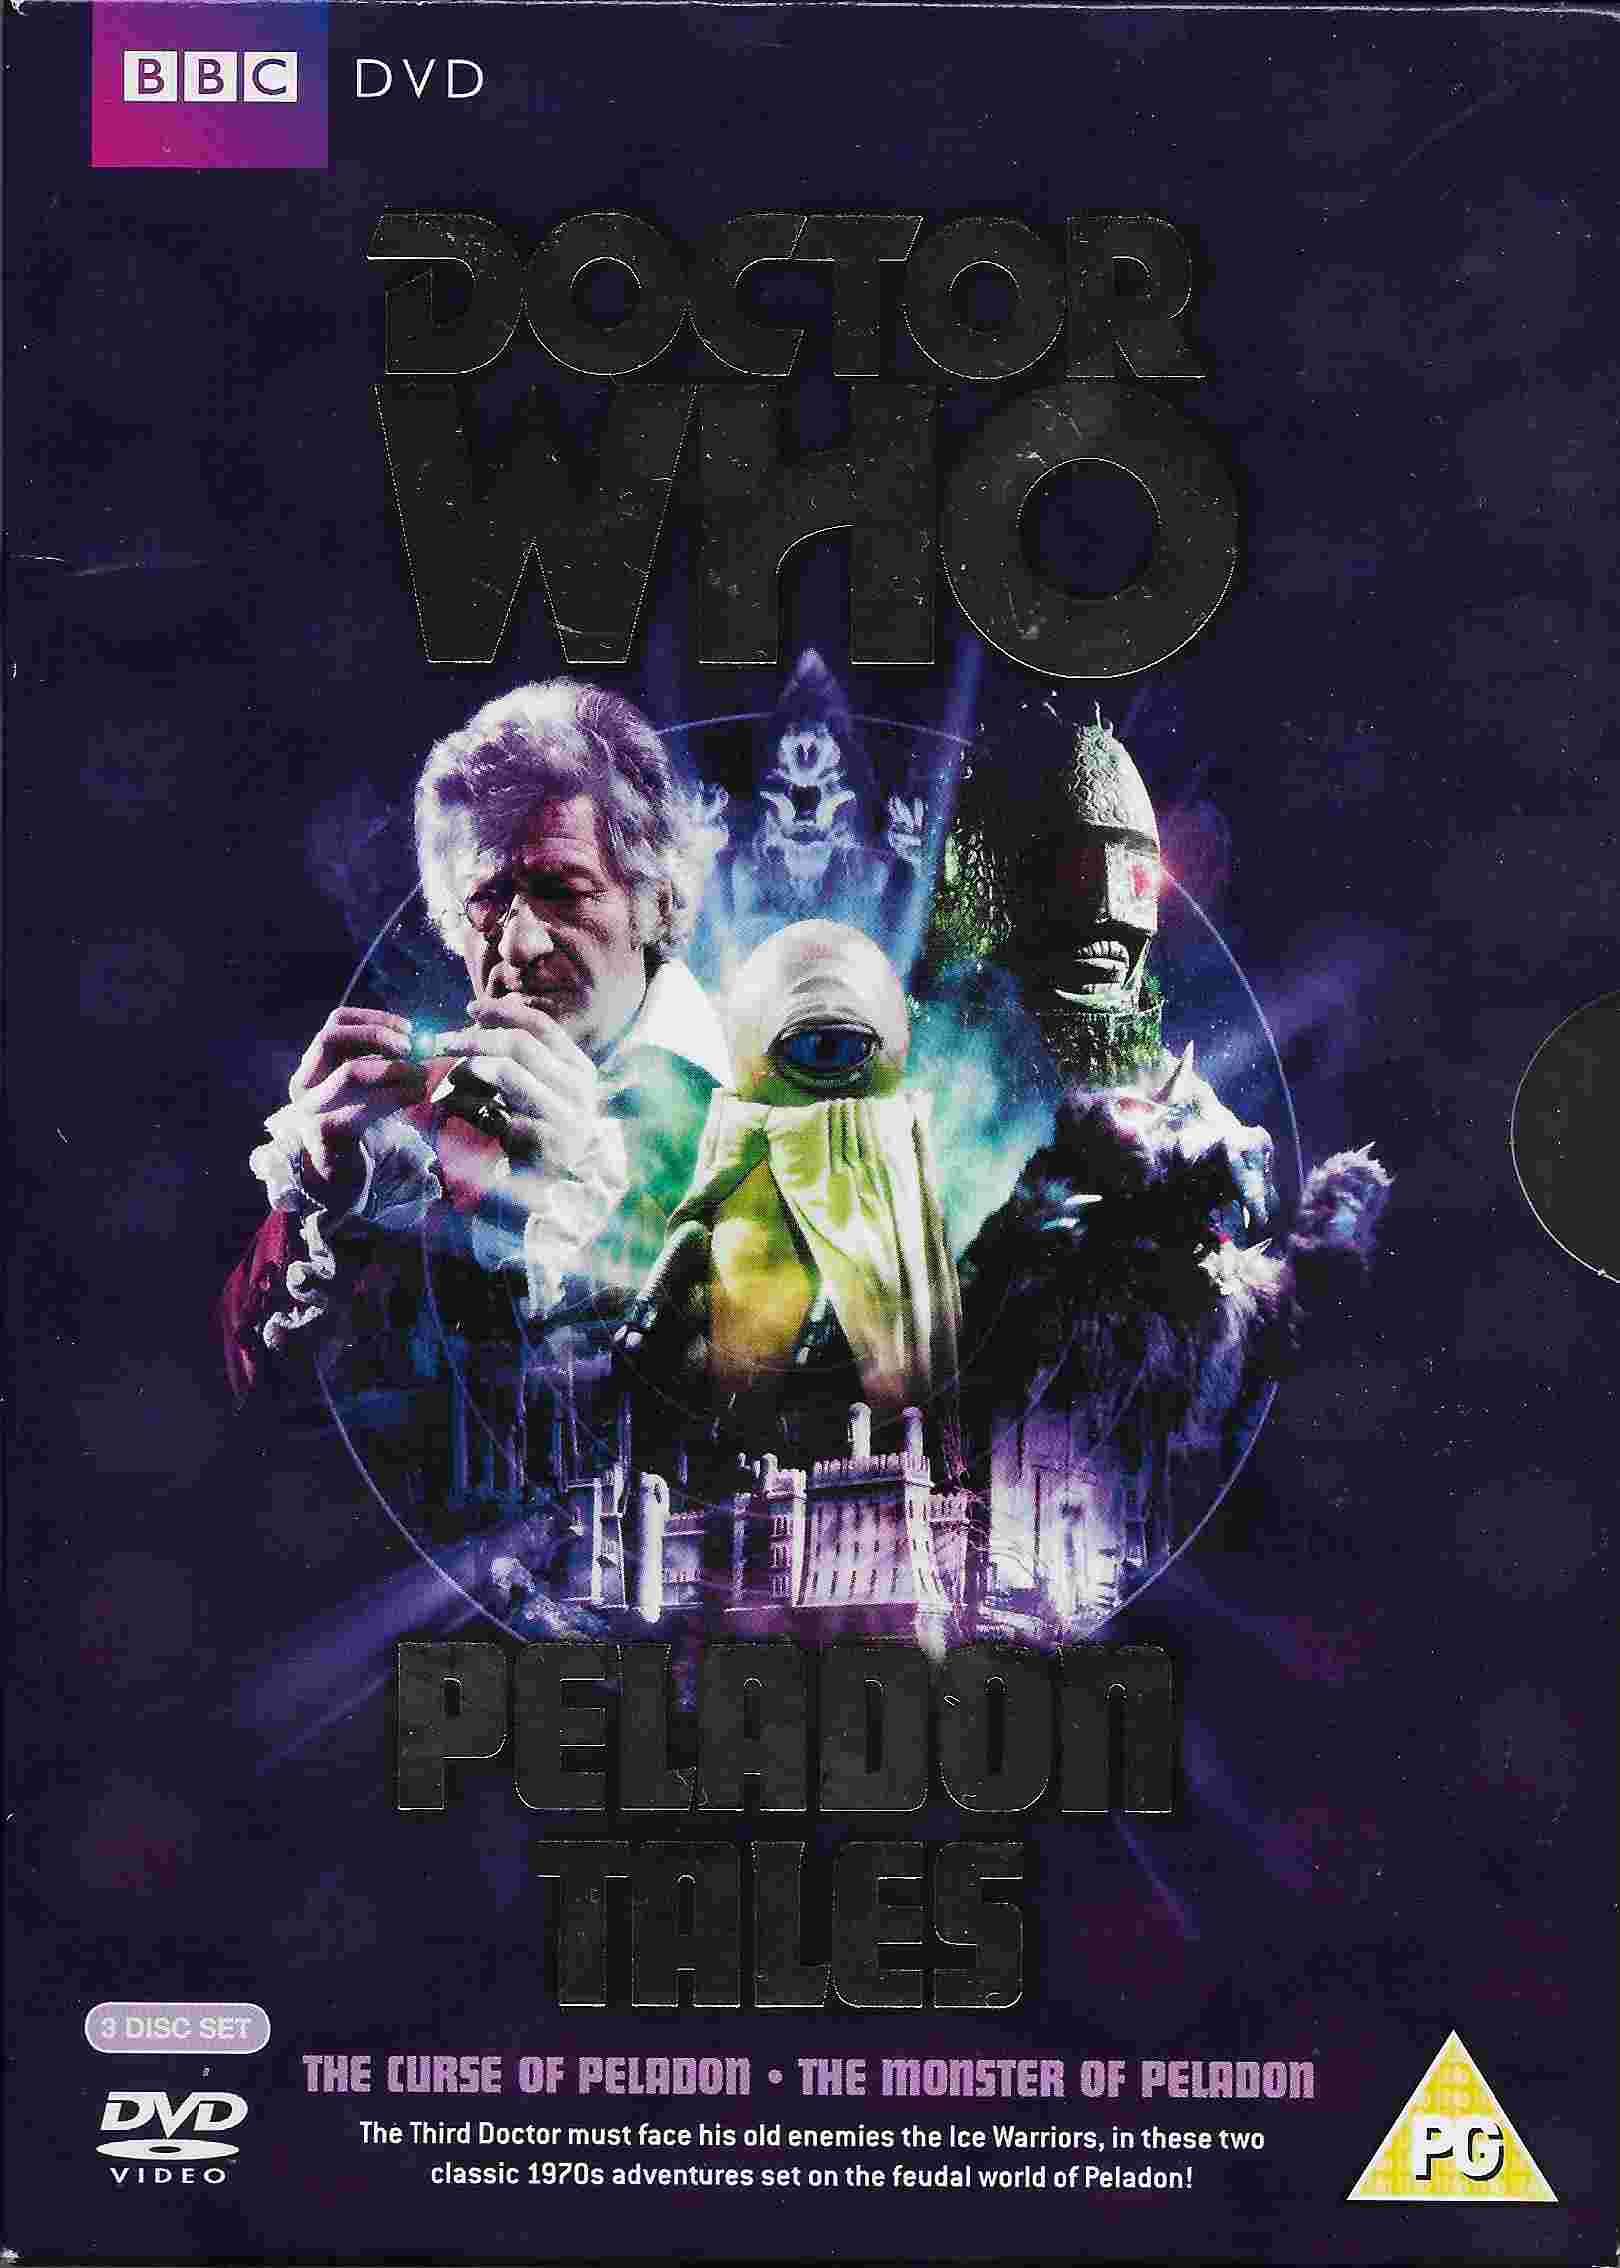 Picture of BBCDVD 2744 Doctor Who - Peladon tales by artist Robert Holmes / Brian Hayles from the BBC dvds - Records and Tapes library